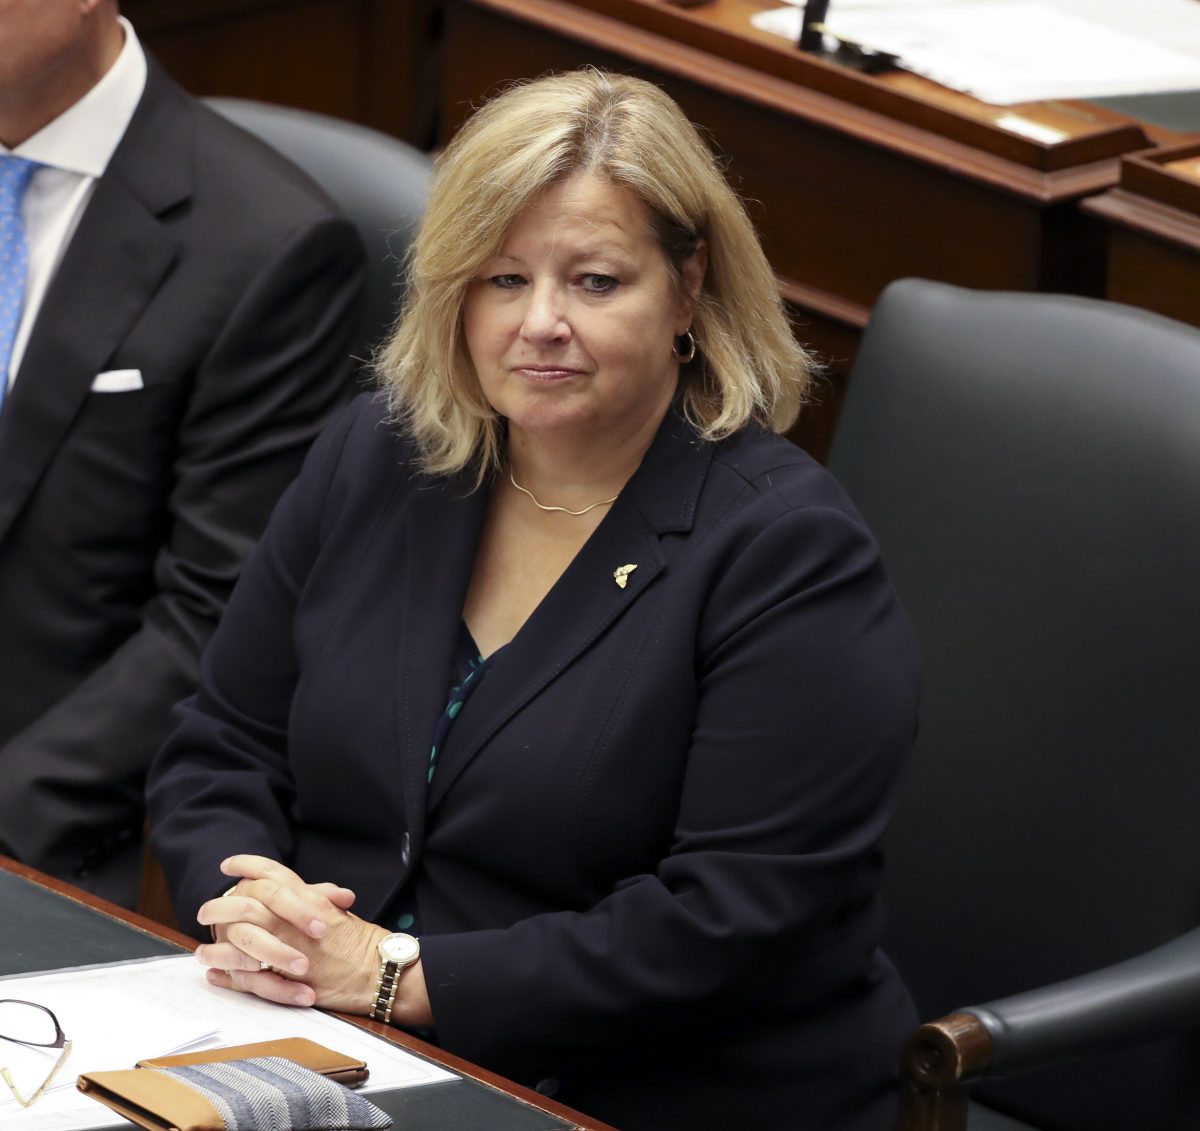 Regulator 'thrilled' about Ford government's planned veterinary services overhaul